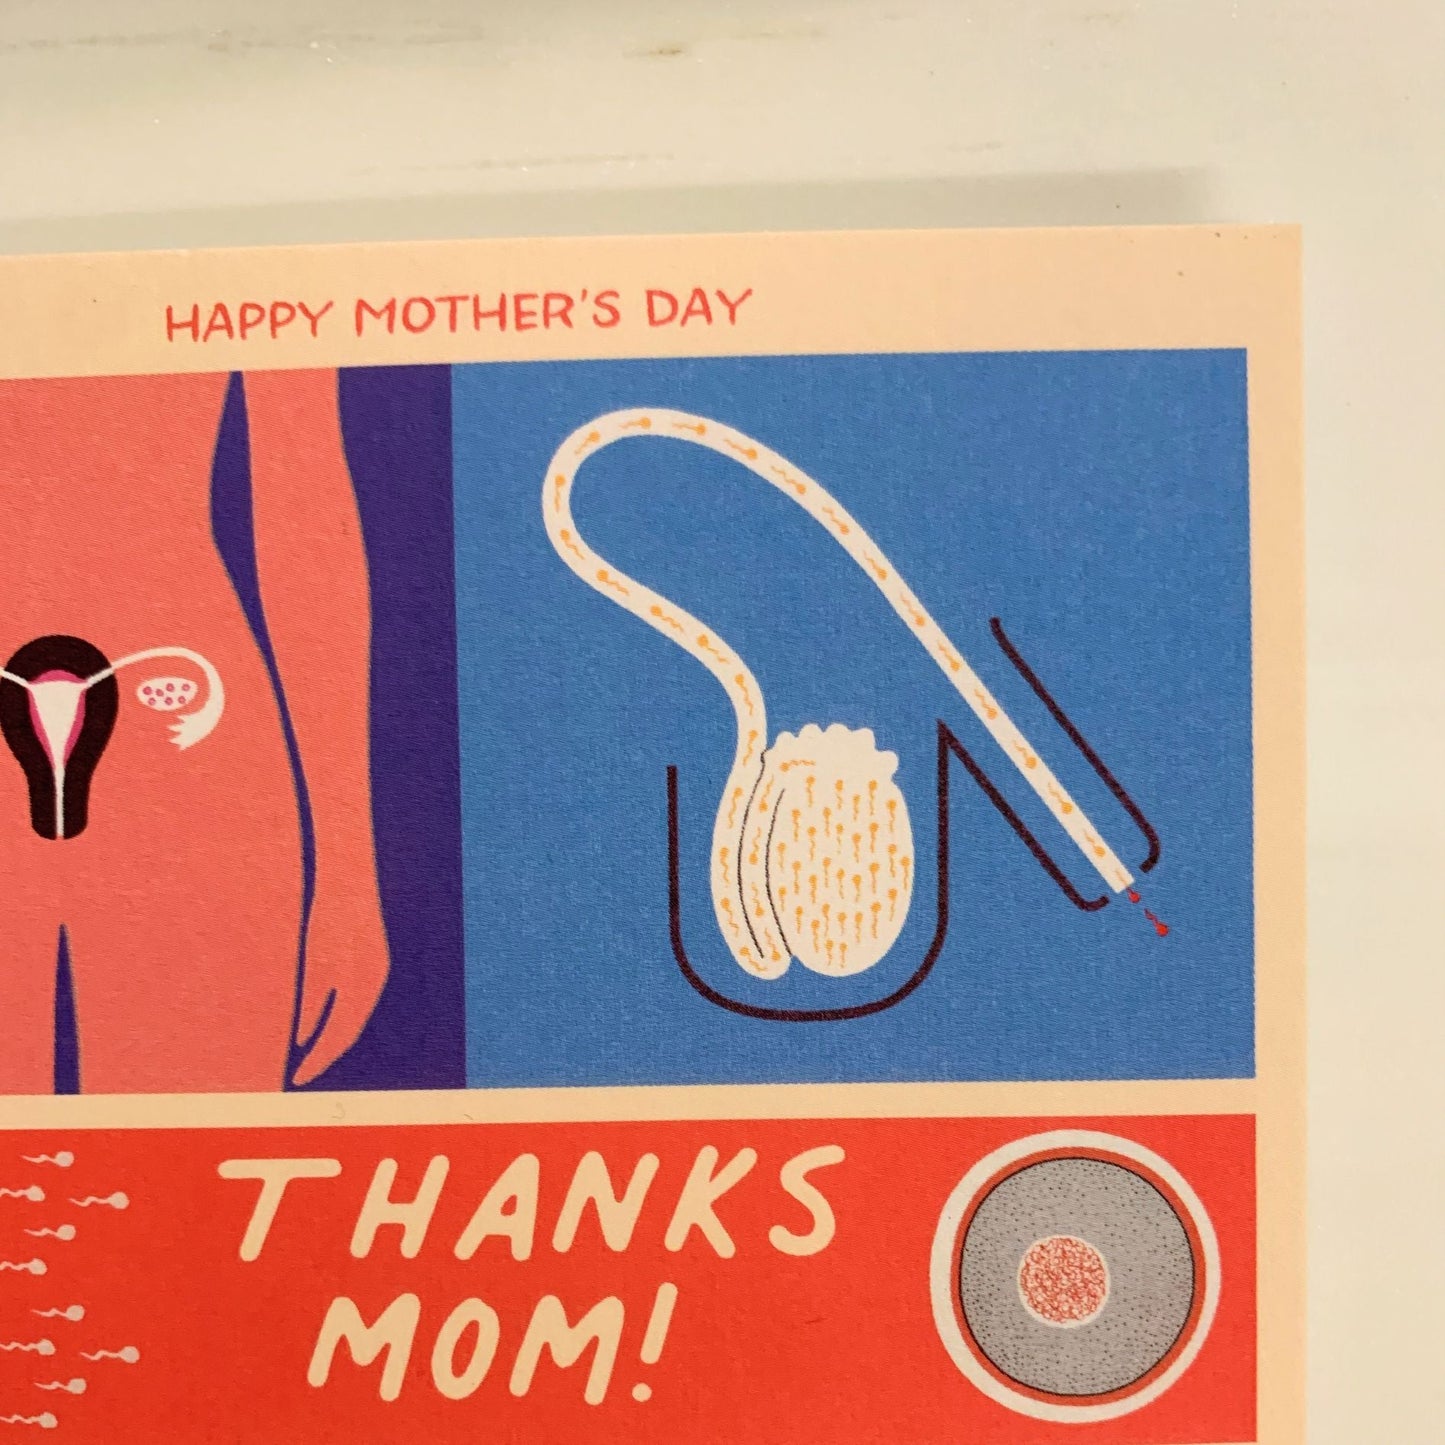 Happy Mother's Day Thanks Mom Kinda Gross Medical Diagram Greeting Card